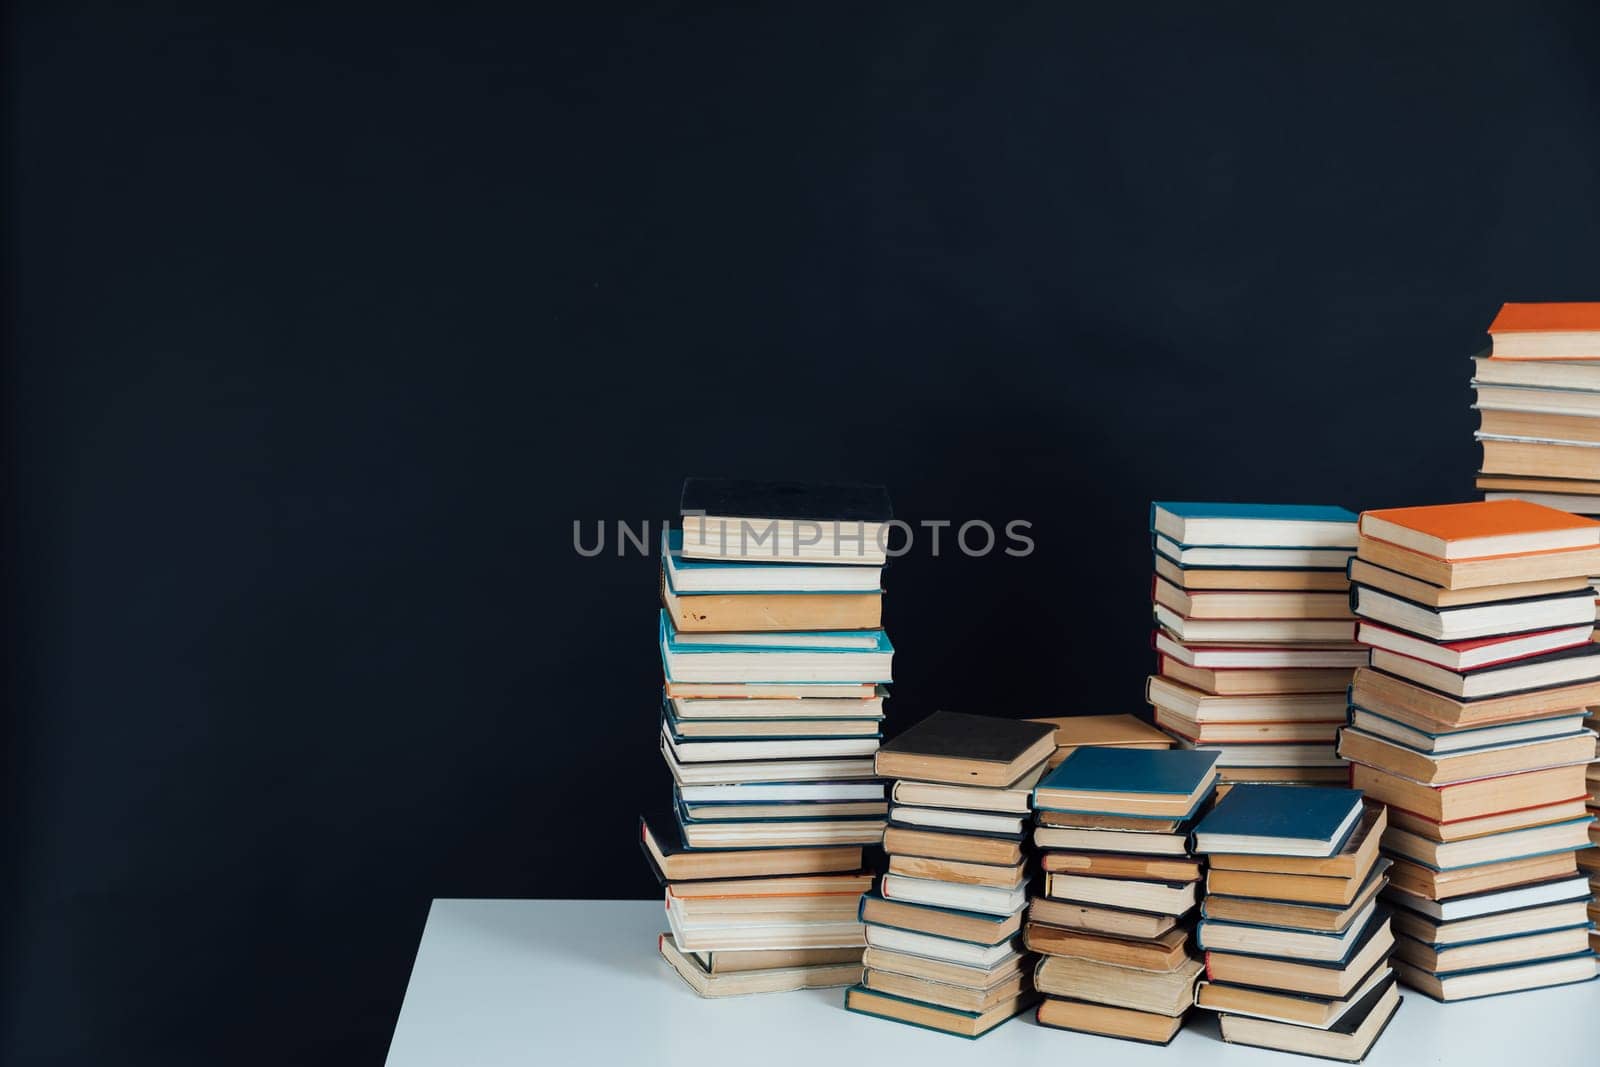 Stacks of books in school library on black background